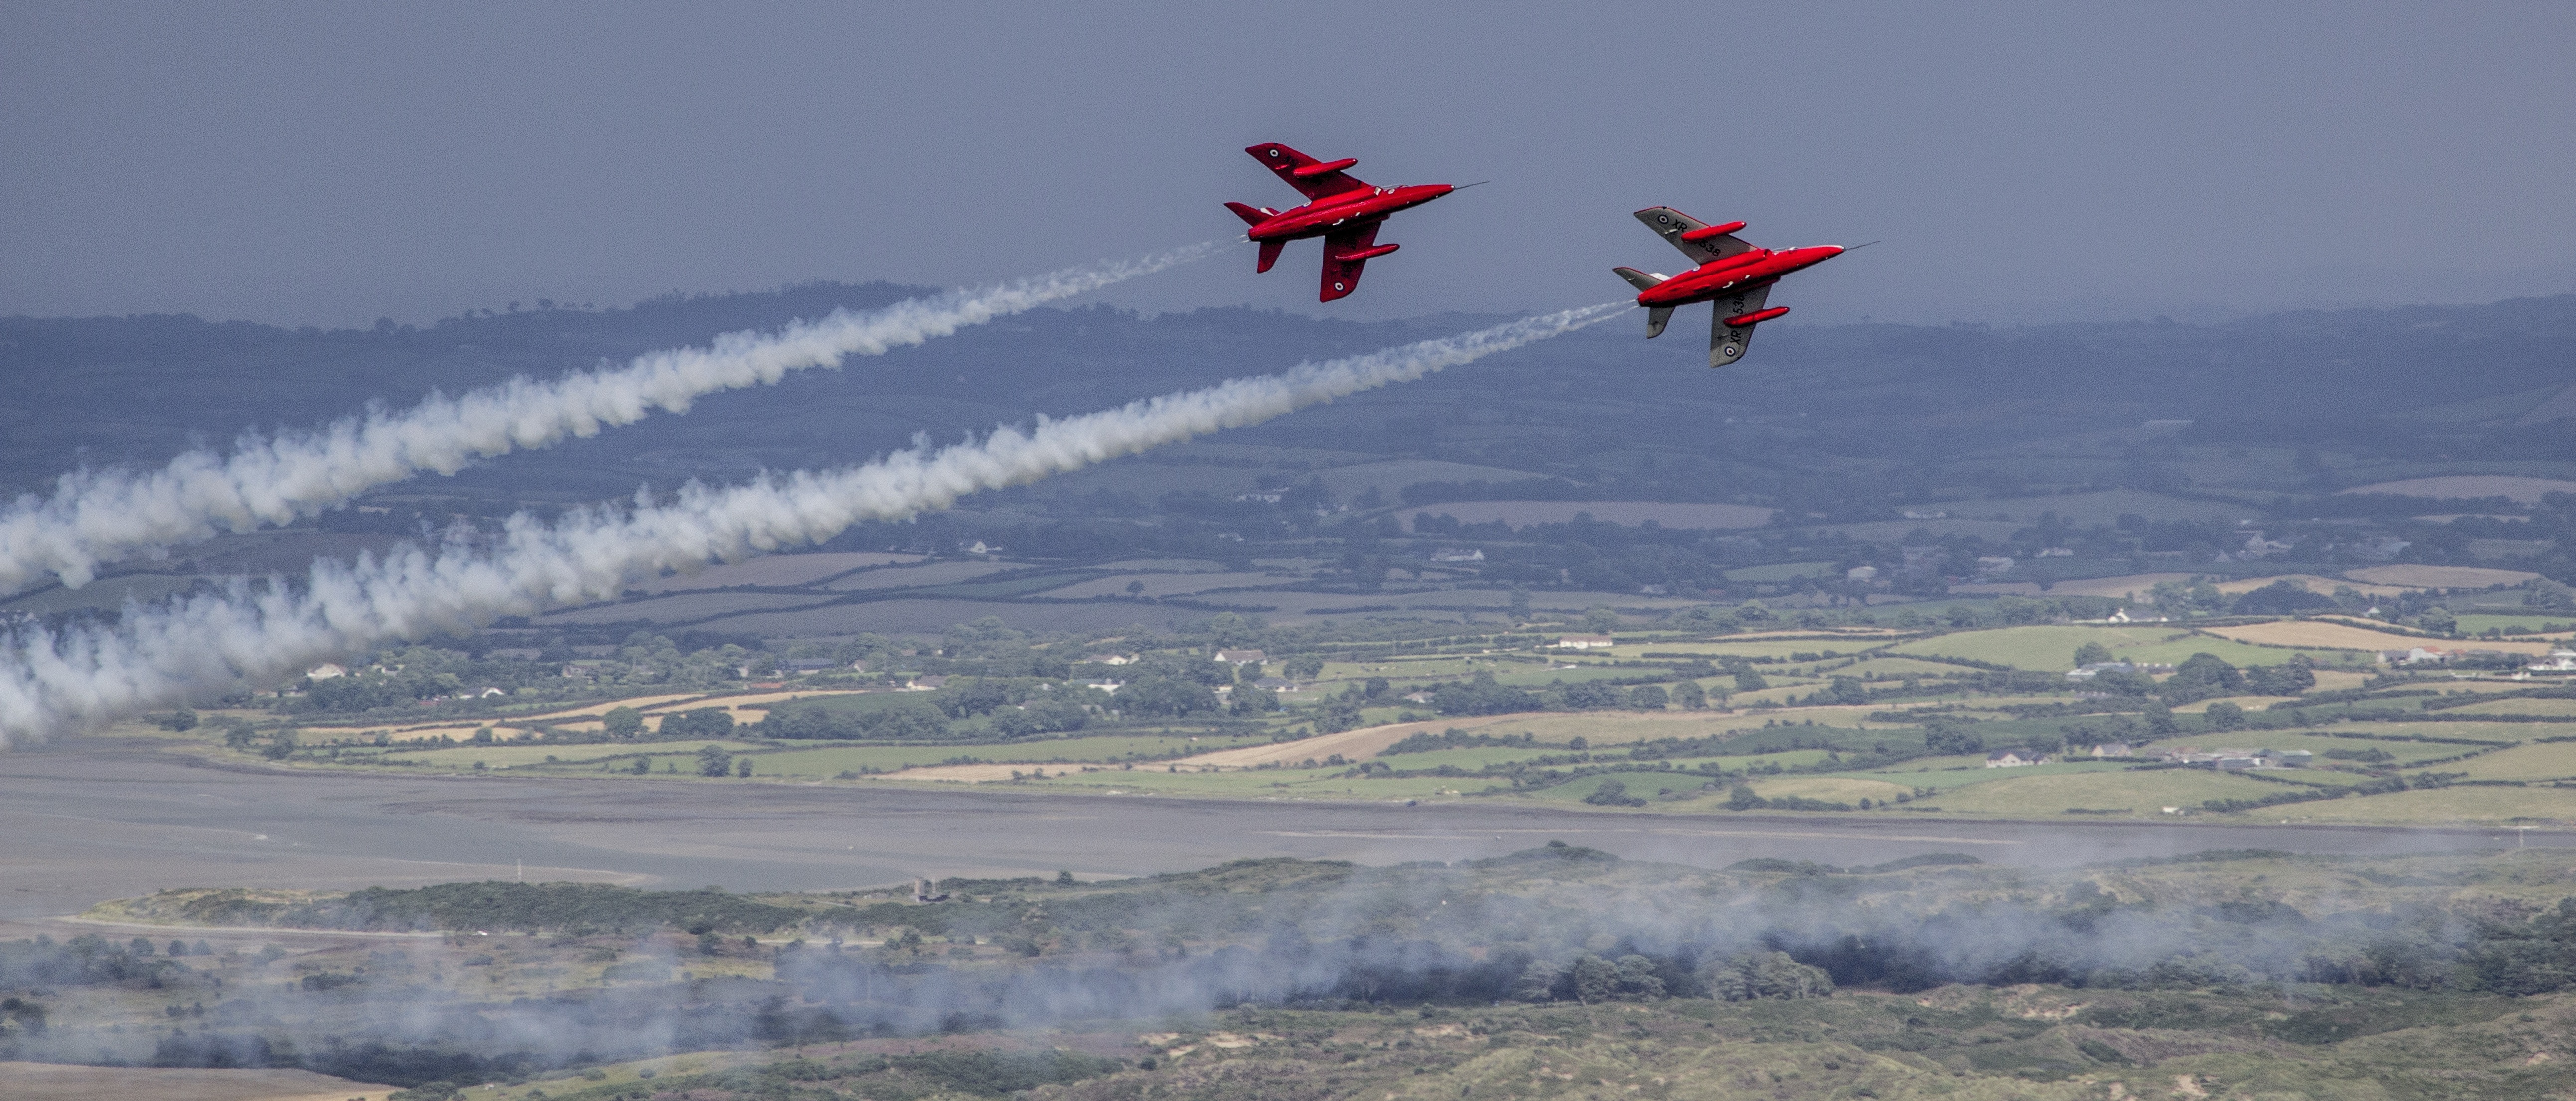 2 red jet fighters